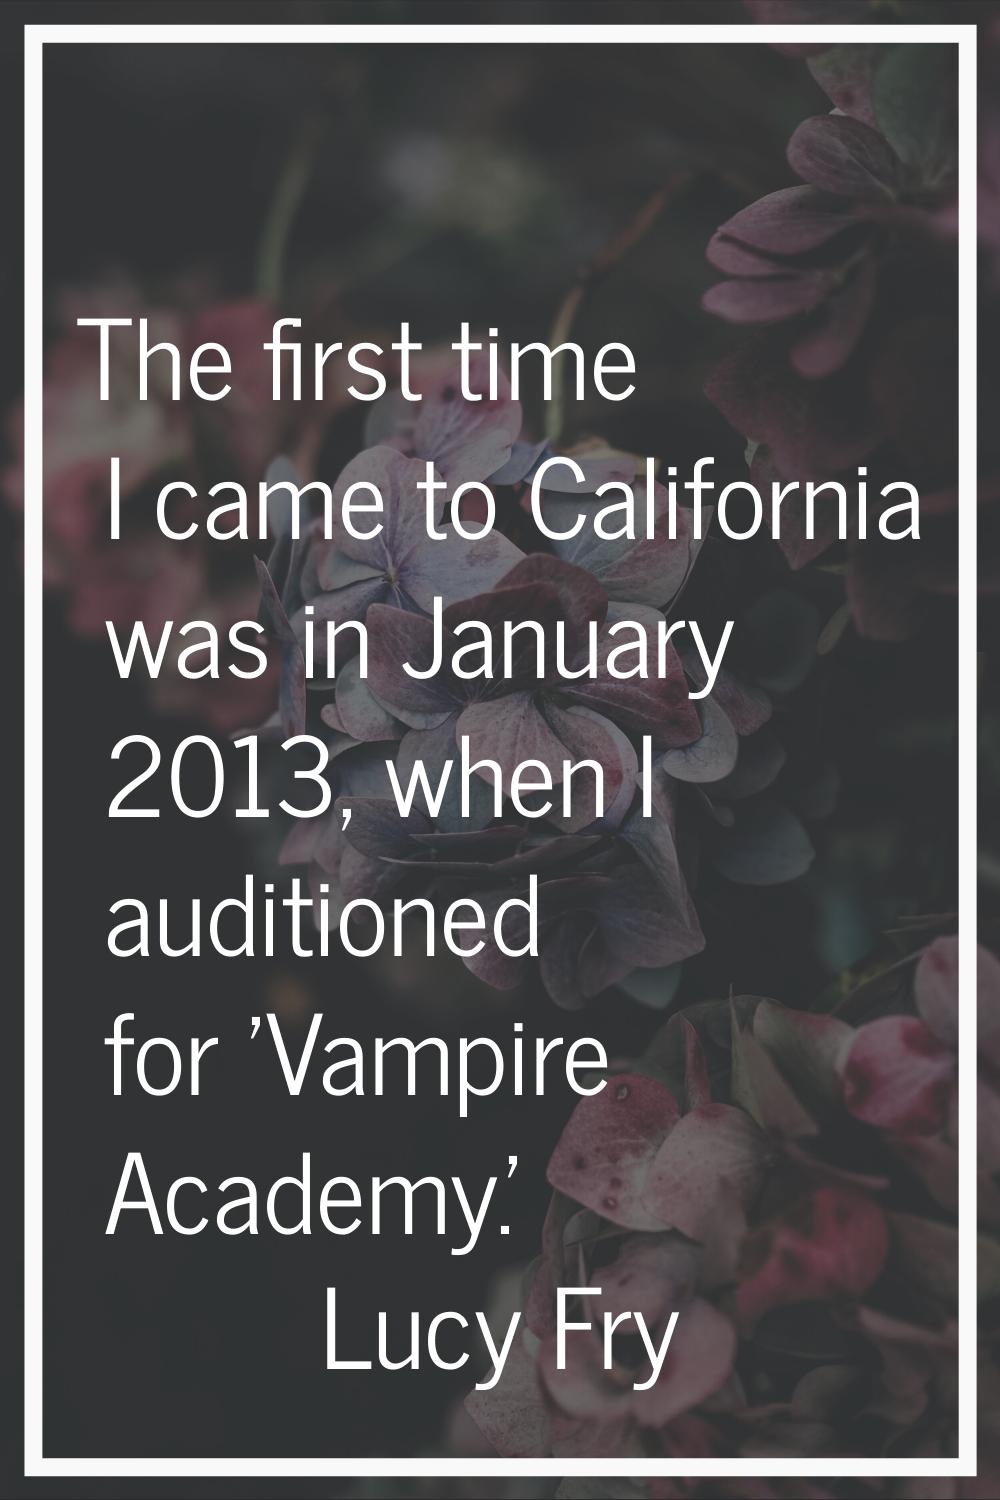 The first time I came to California was in January 2013, when I auditioned for 'Vampire Academy.'